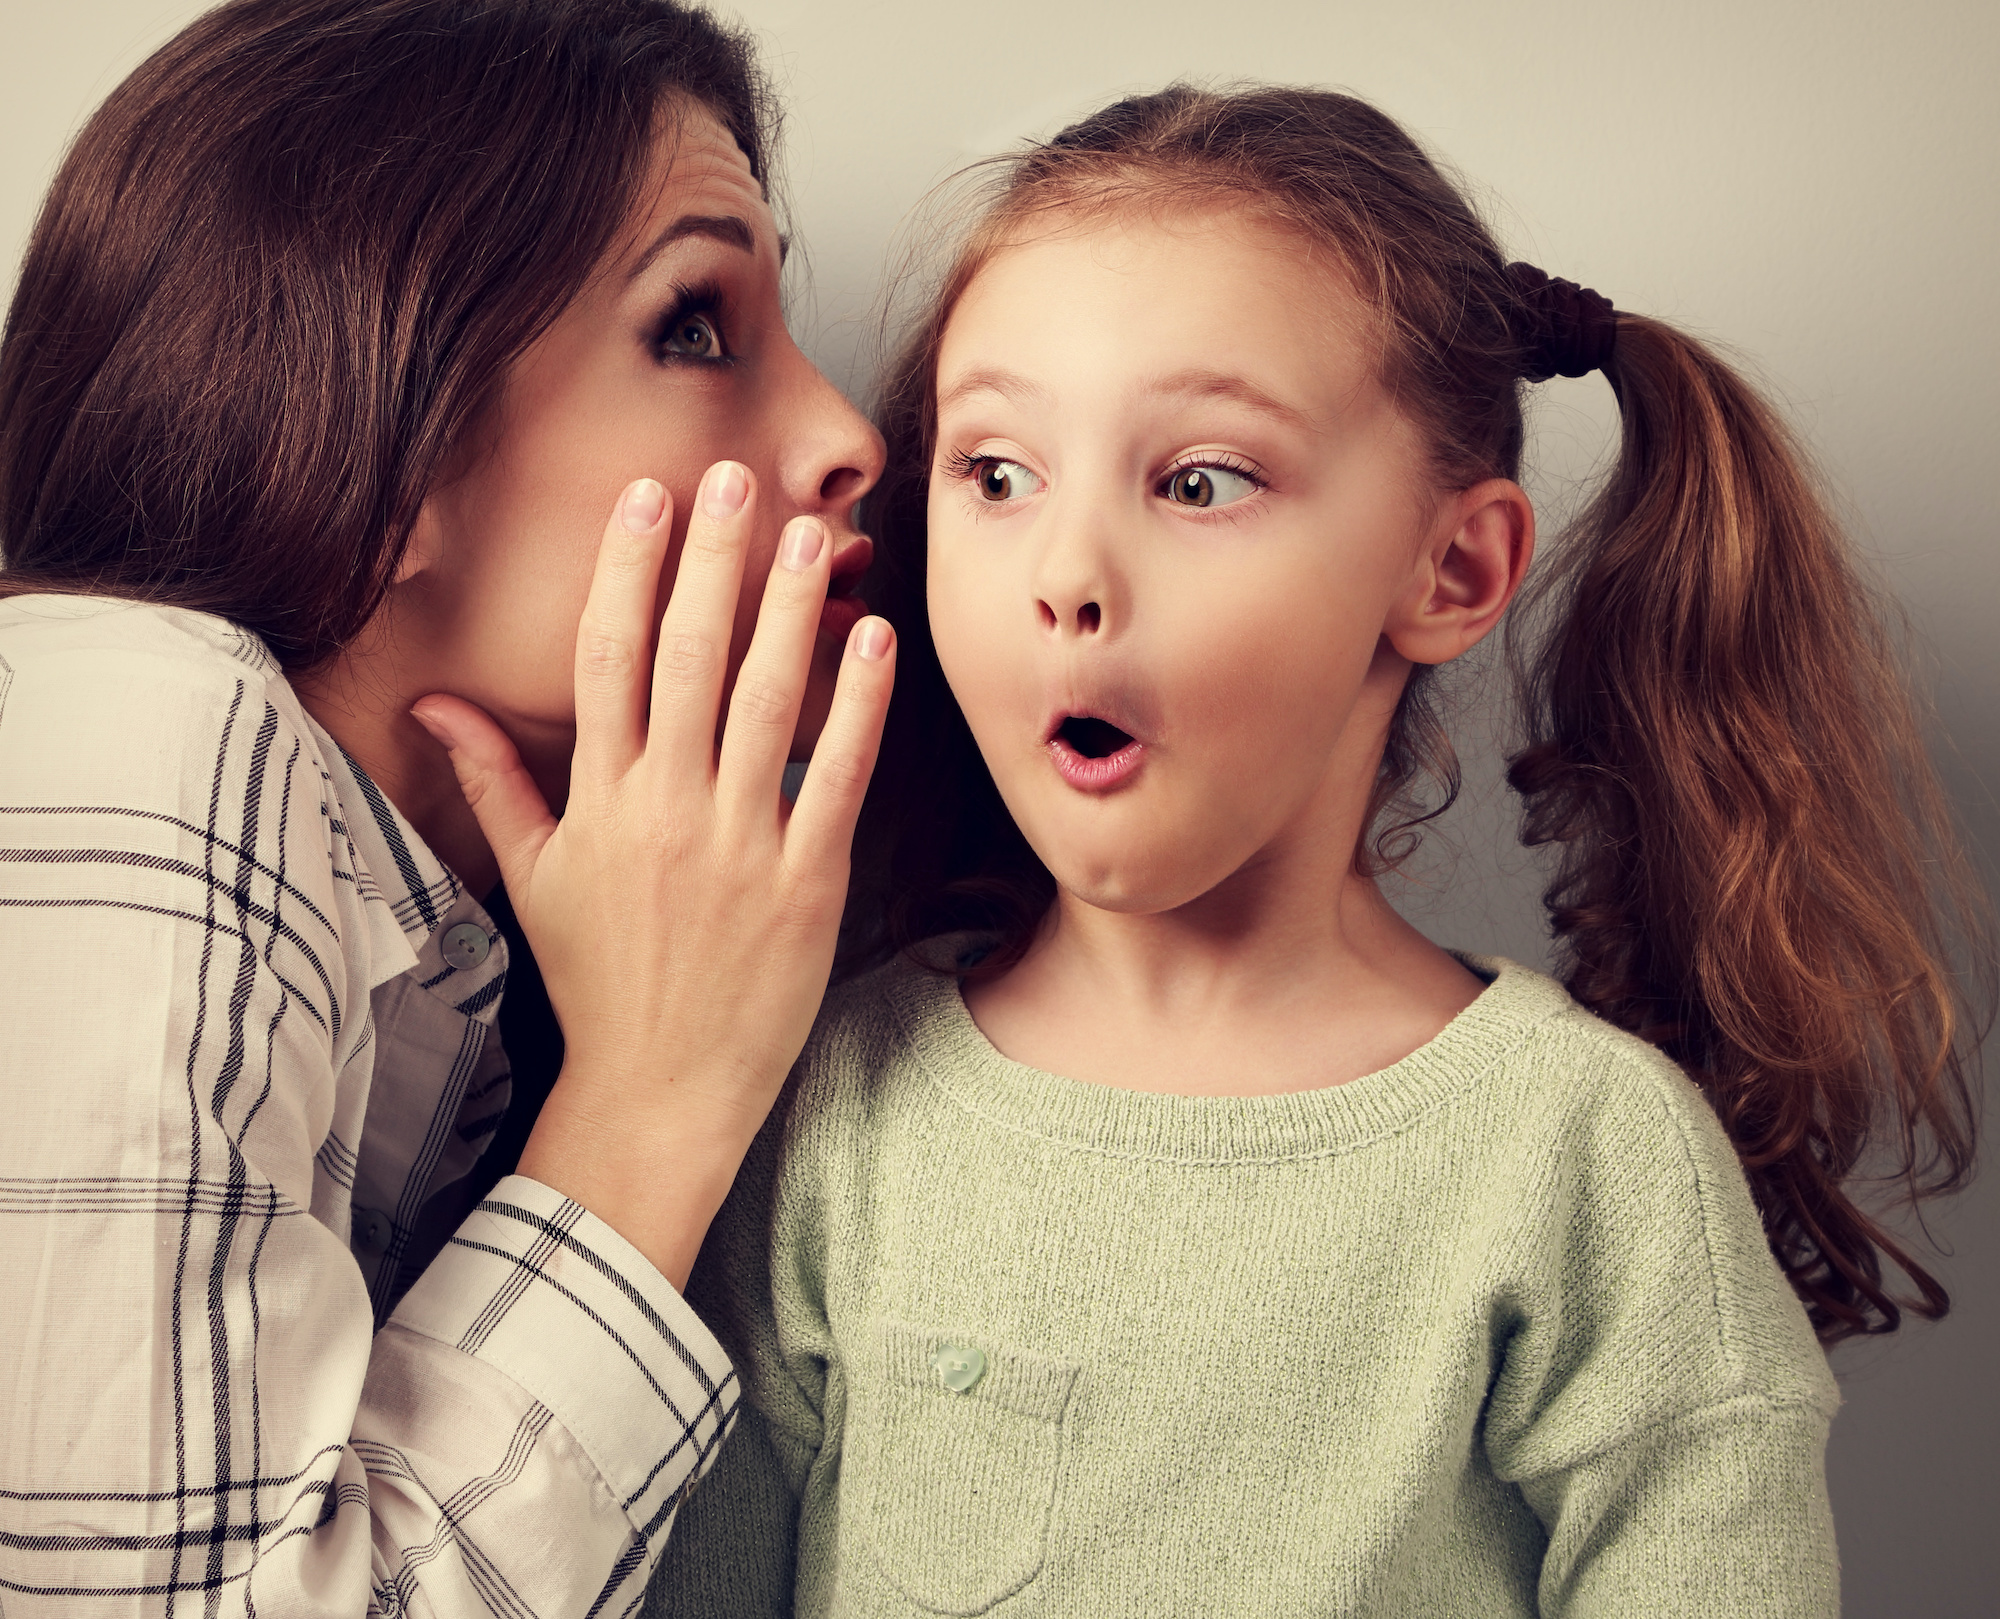 A young girl looks surprised as her mother whispers in her ear